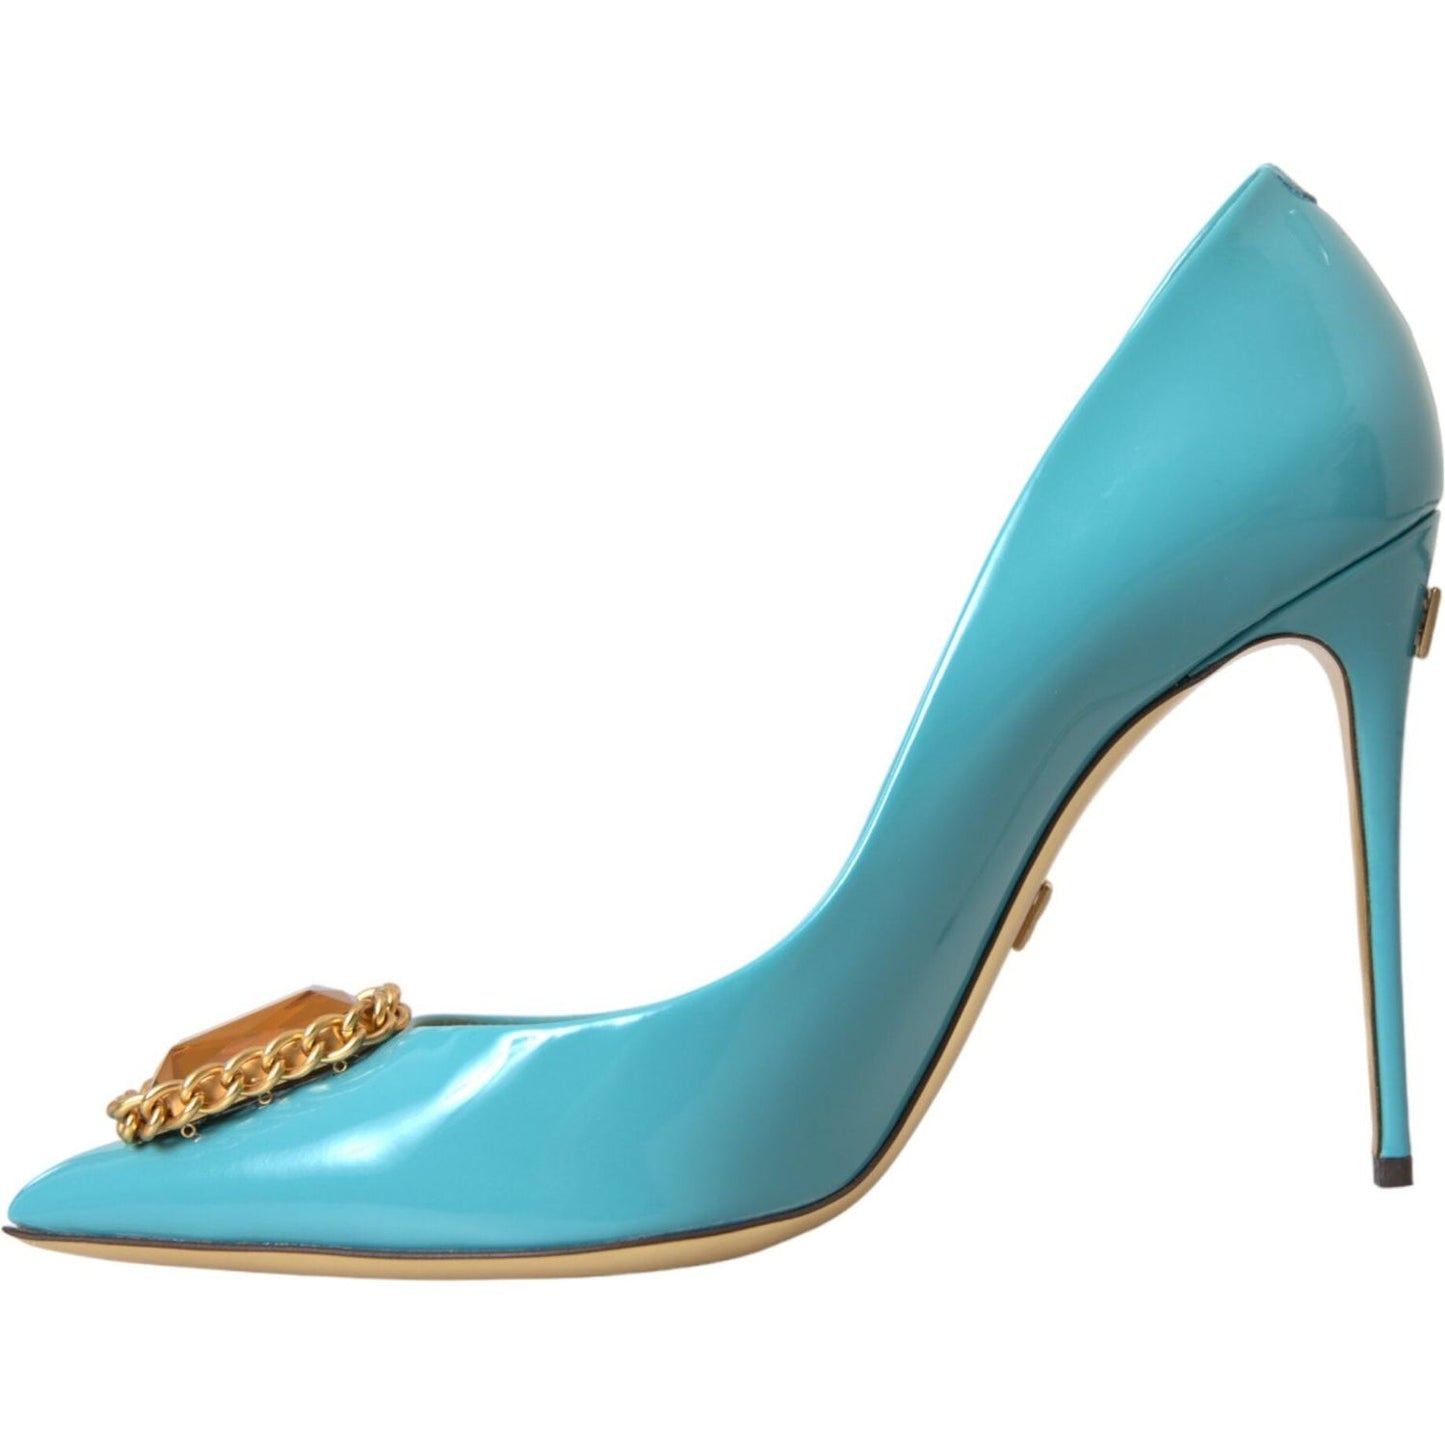 Dolce & Gabbana Blue Gold Leather Crystals Heels Pumps Shoes blue-gold-leather-crystals-heels-pumps-shoes